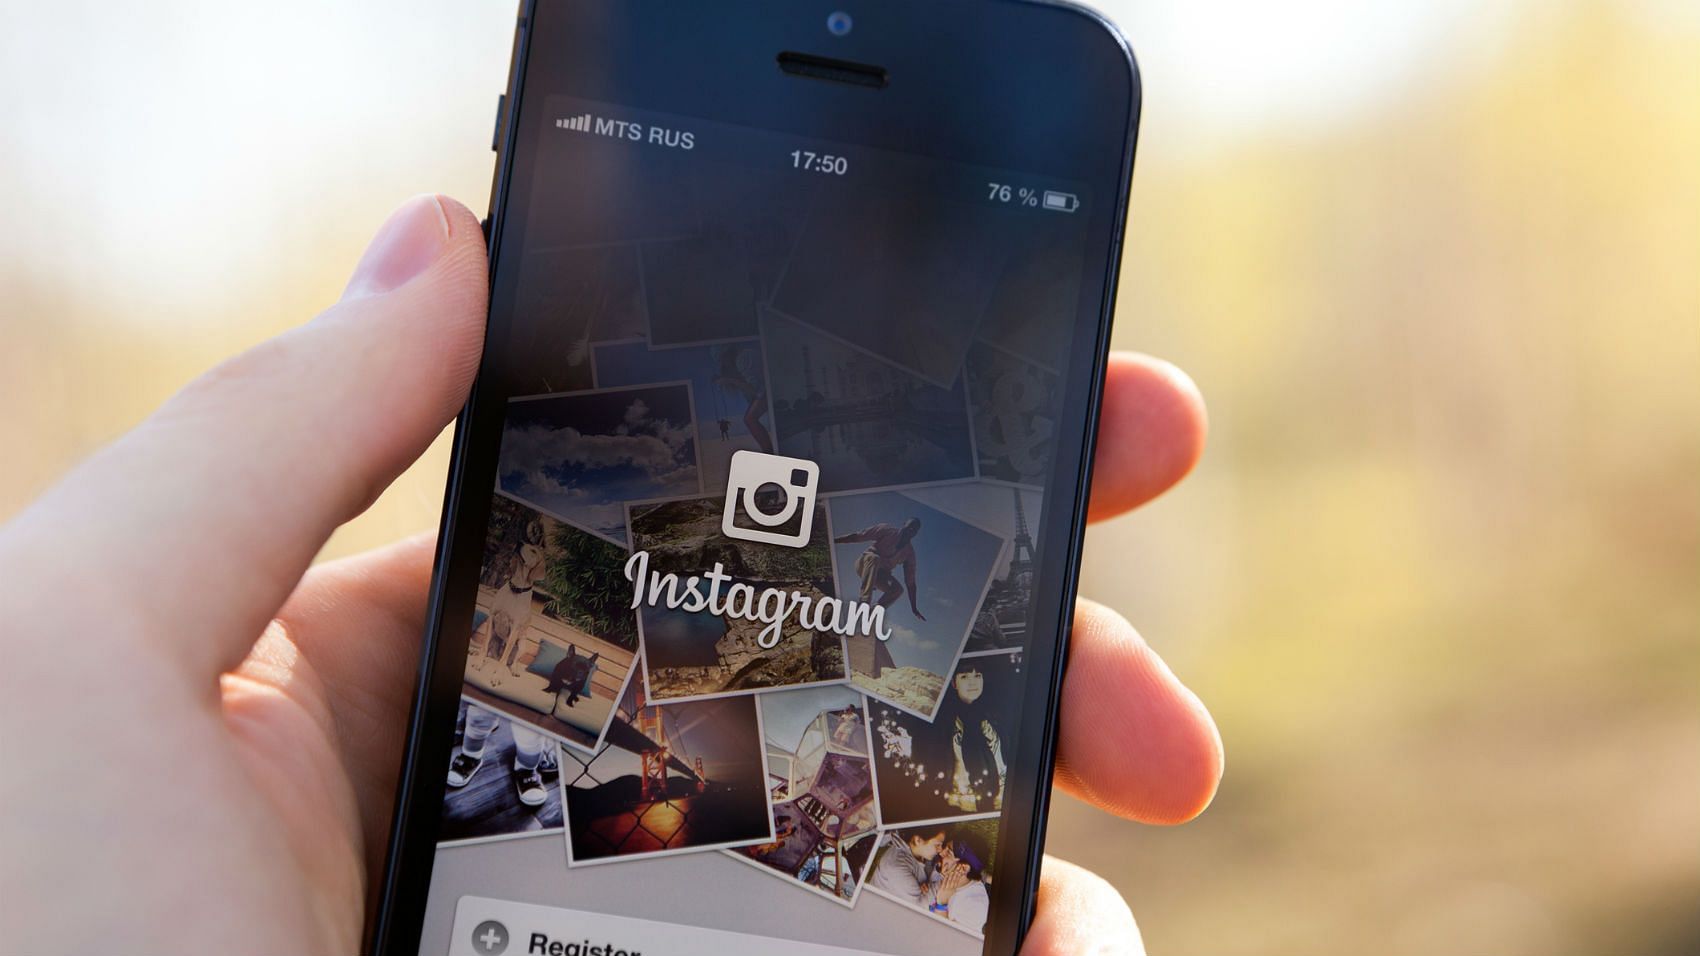 Many users pay for Instagram authentication as well.